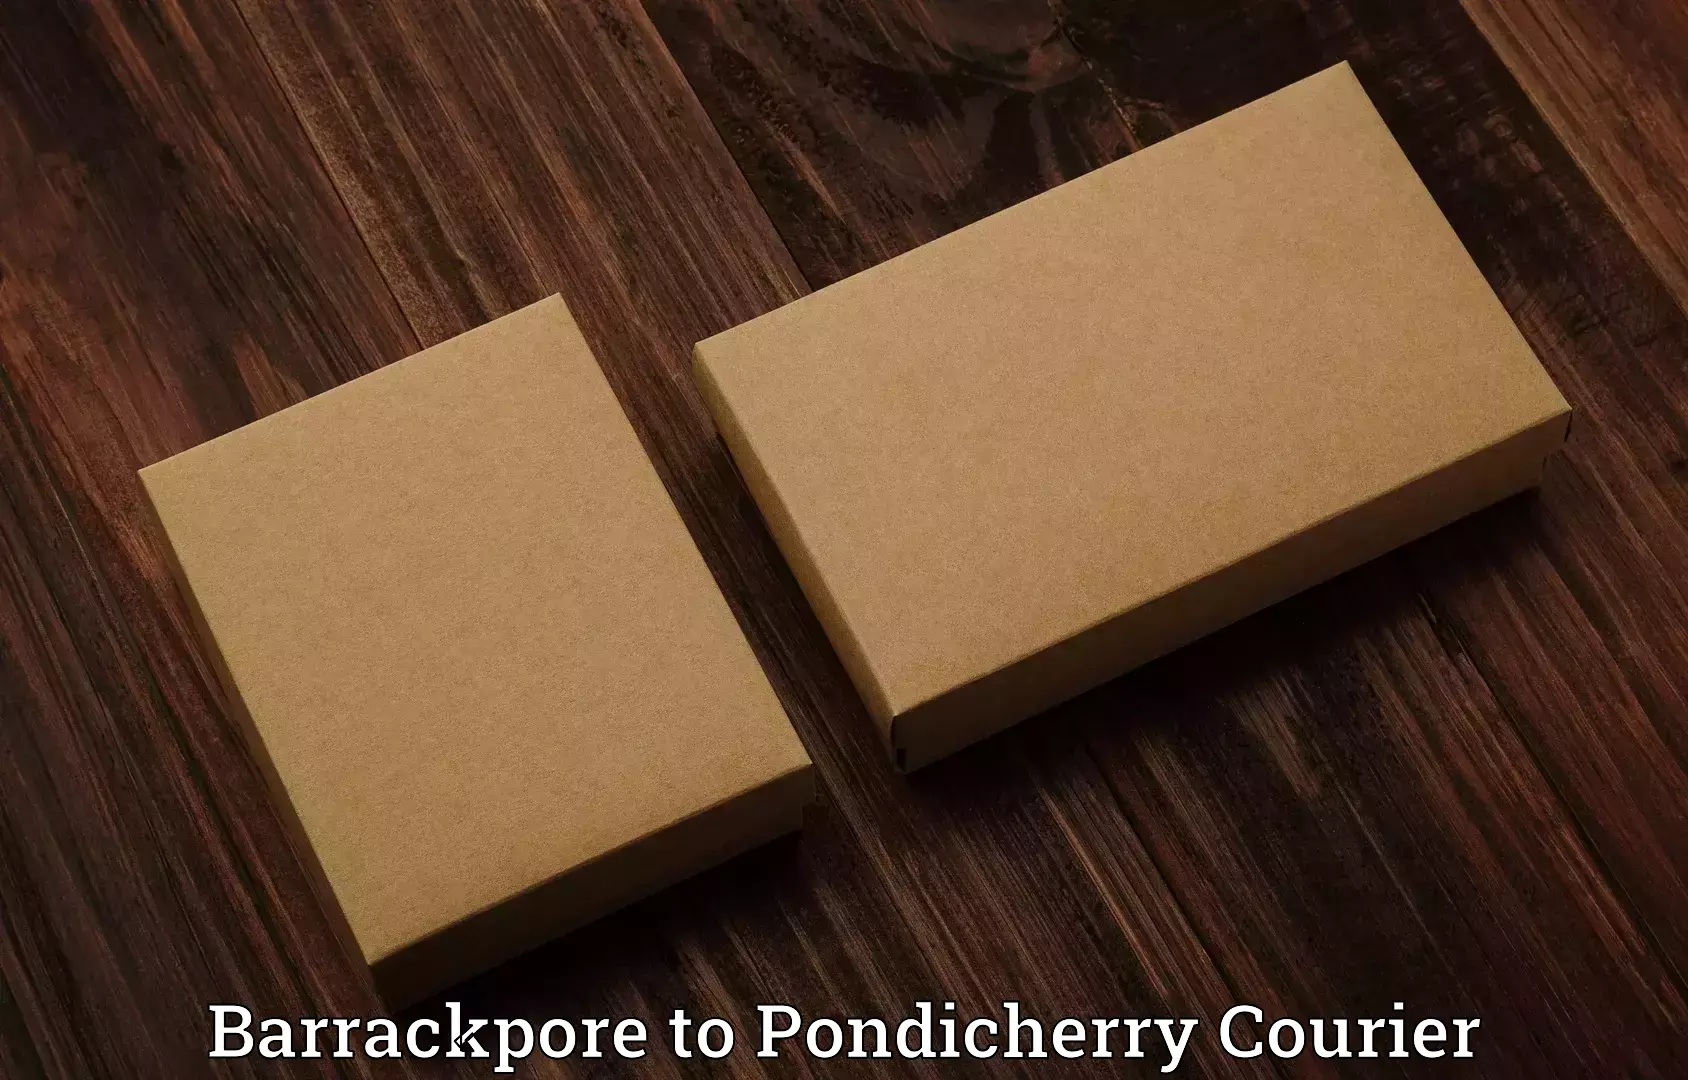 Luggage shipment specialists Barrackpore to Pondicherry